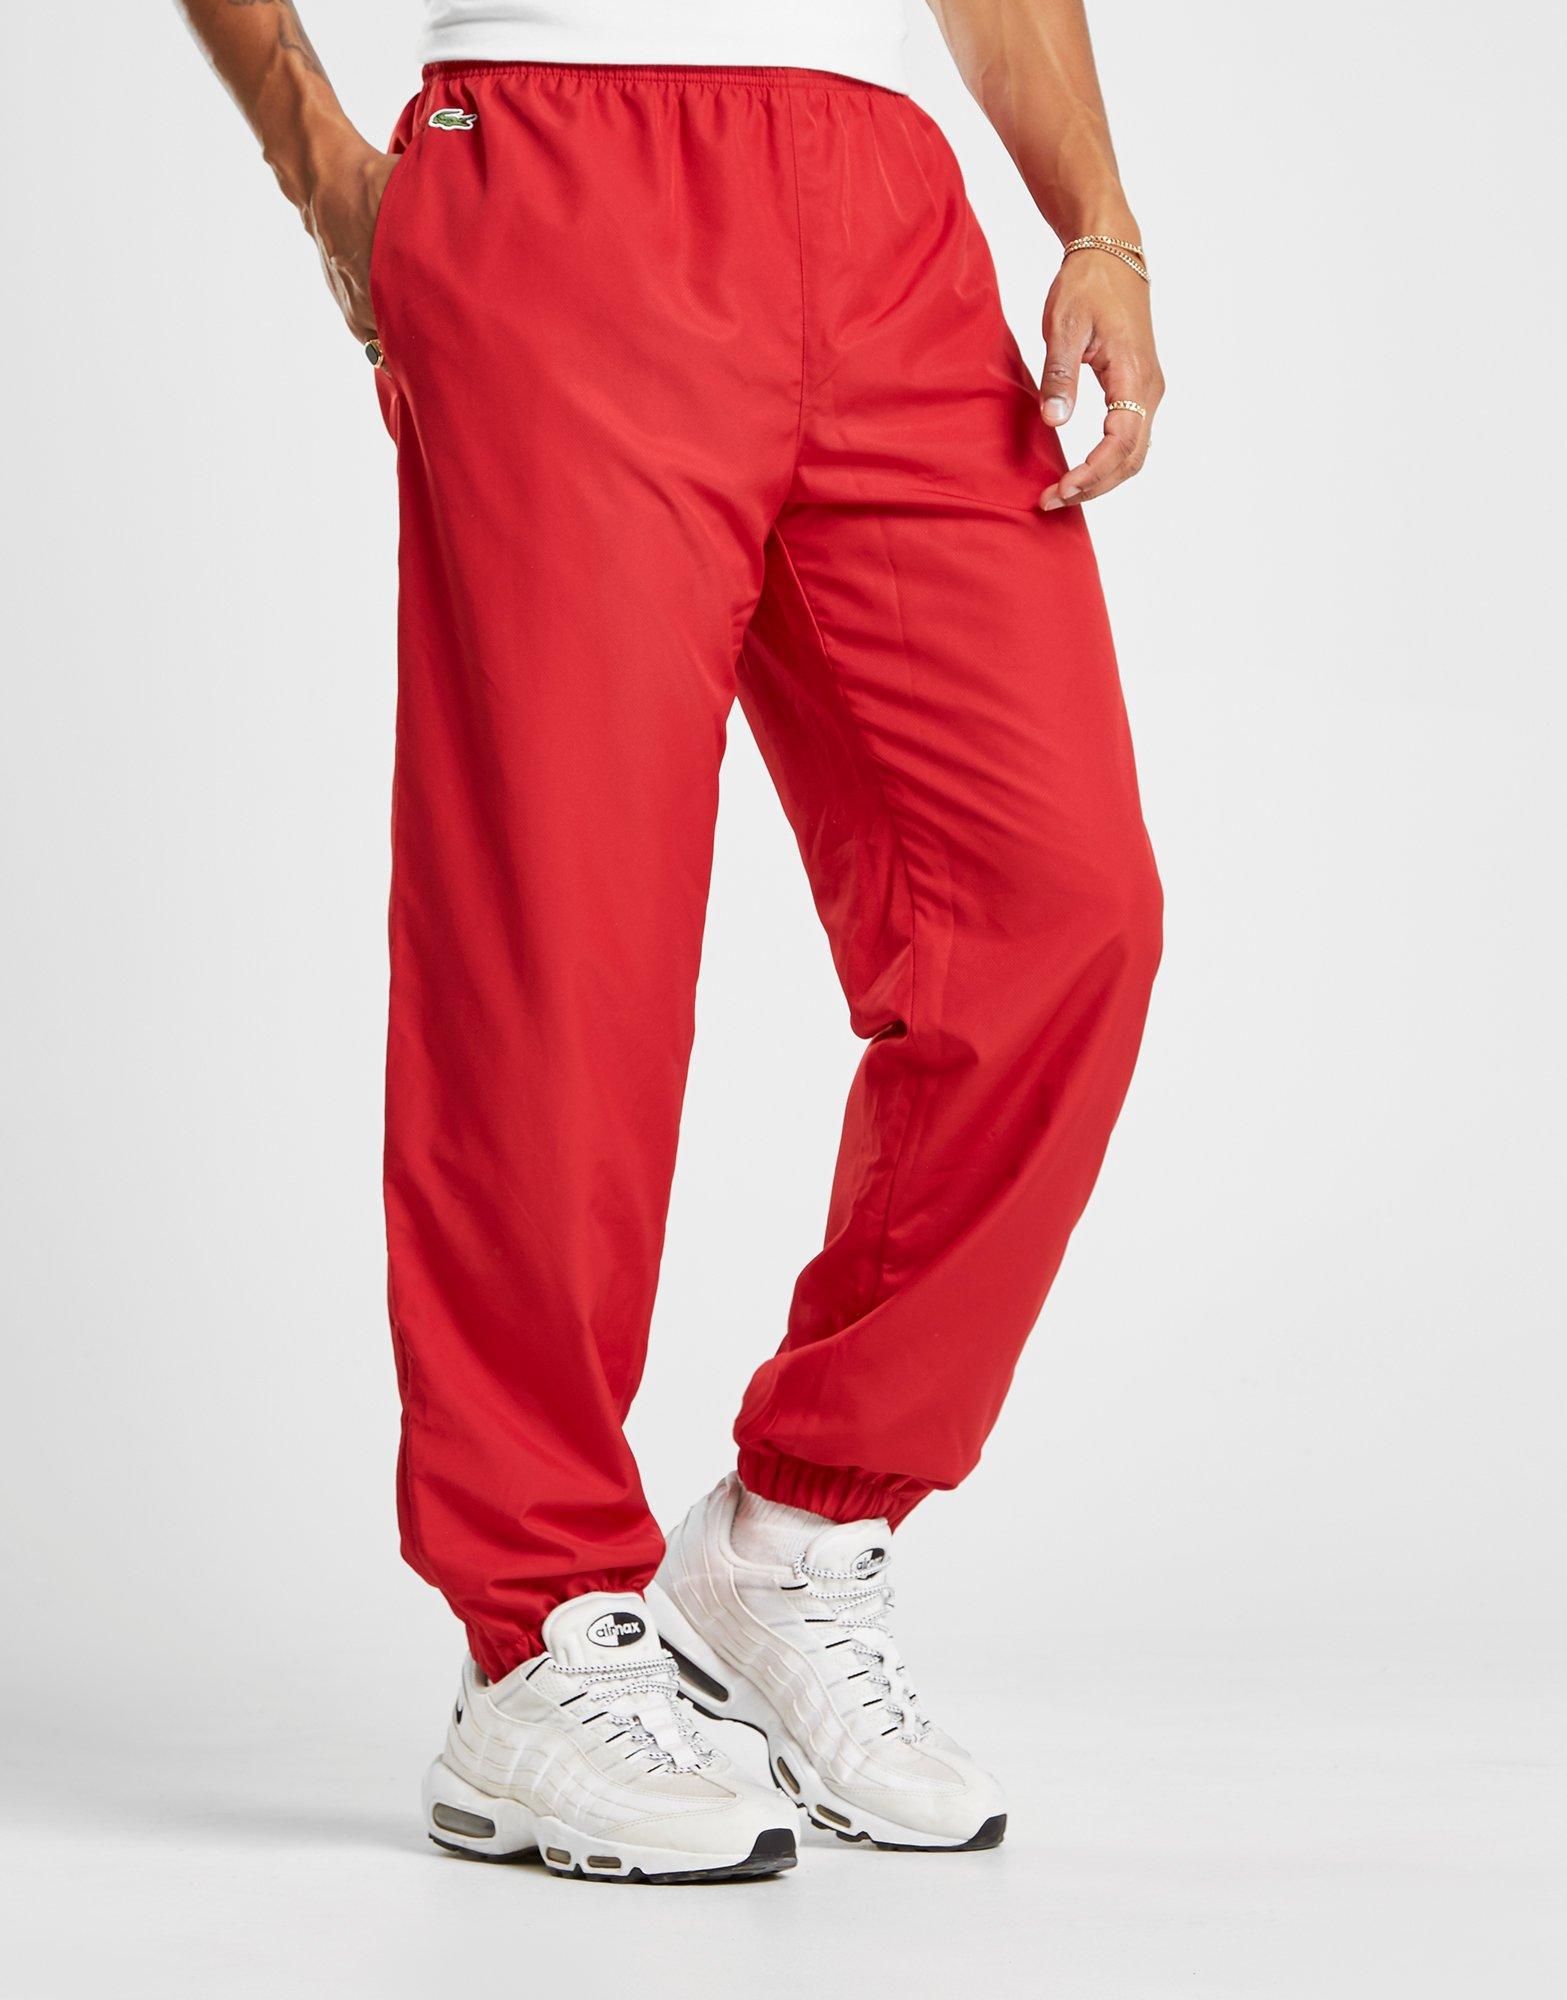 Lacoste Guppy Track Pants in Red for 